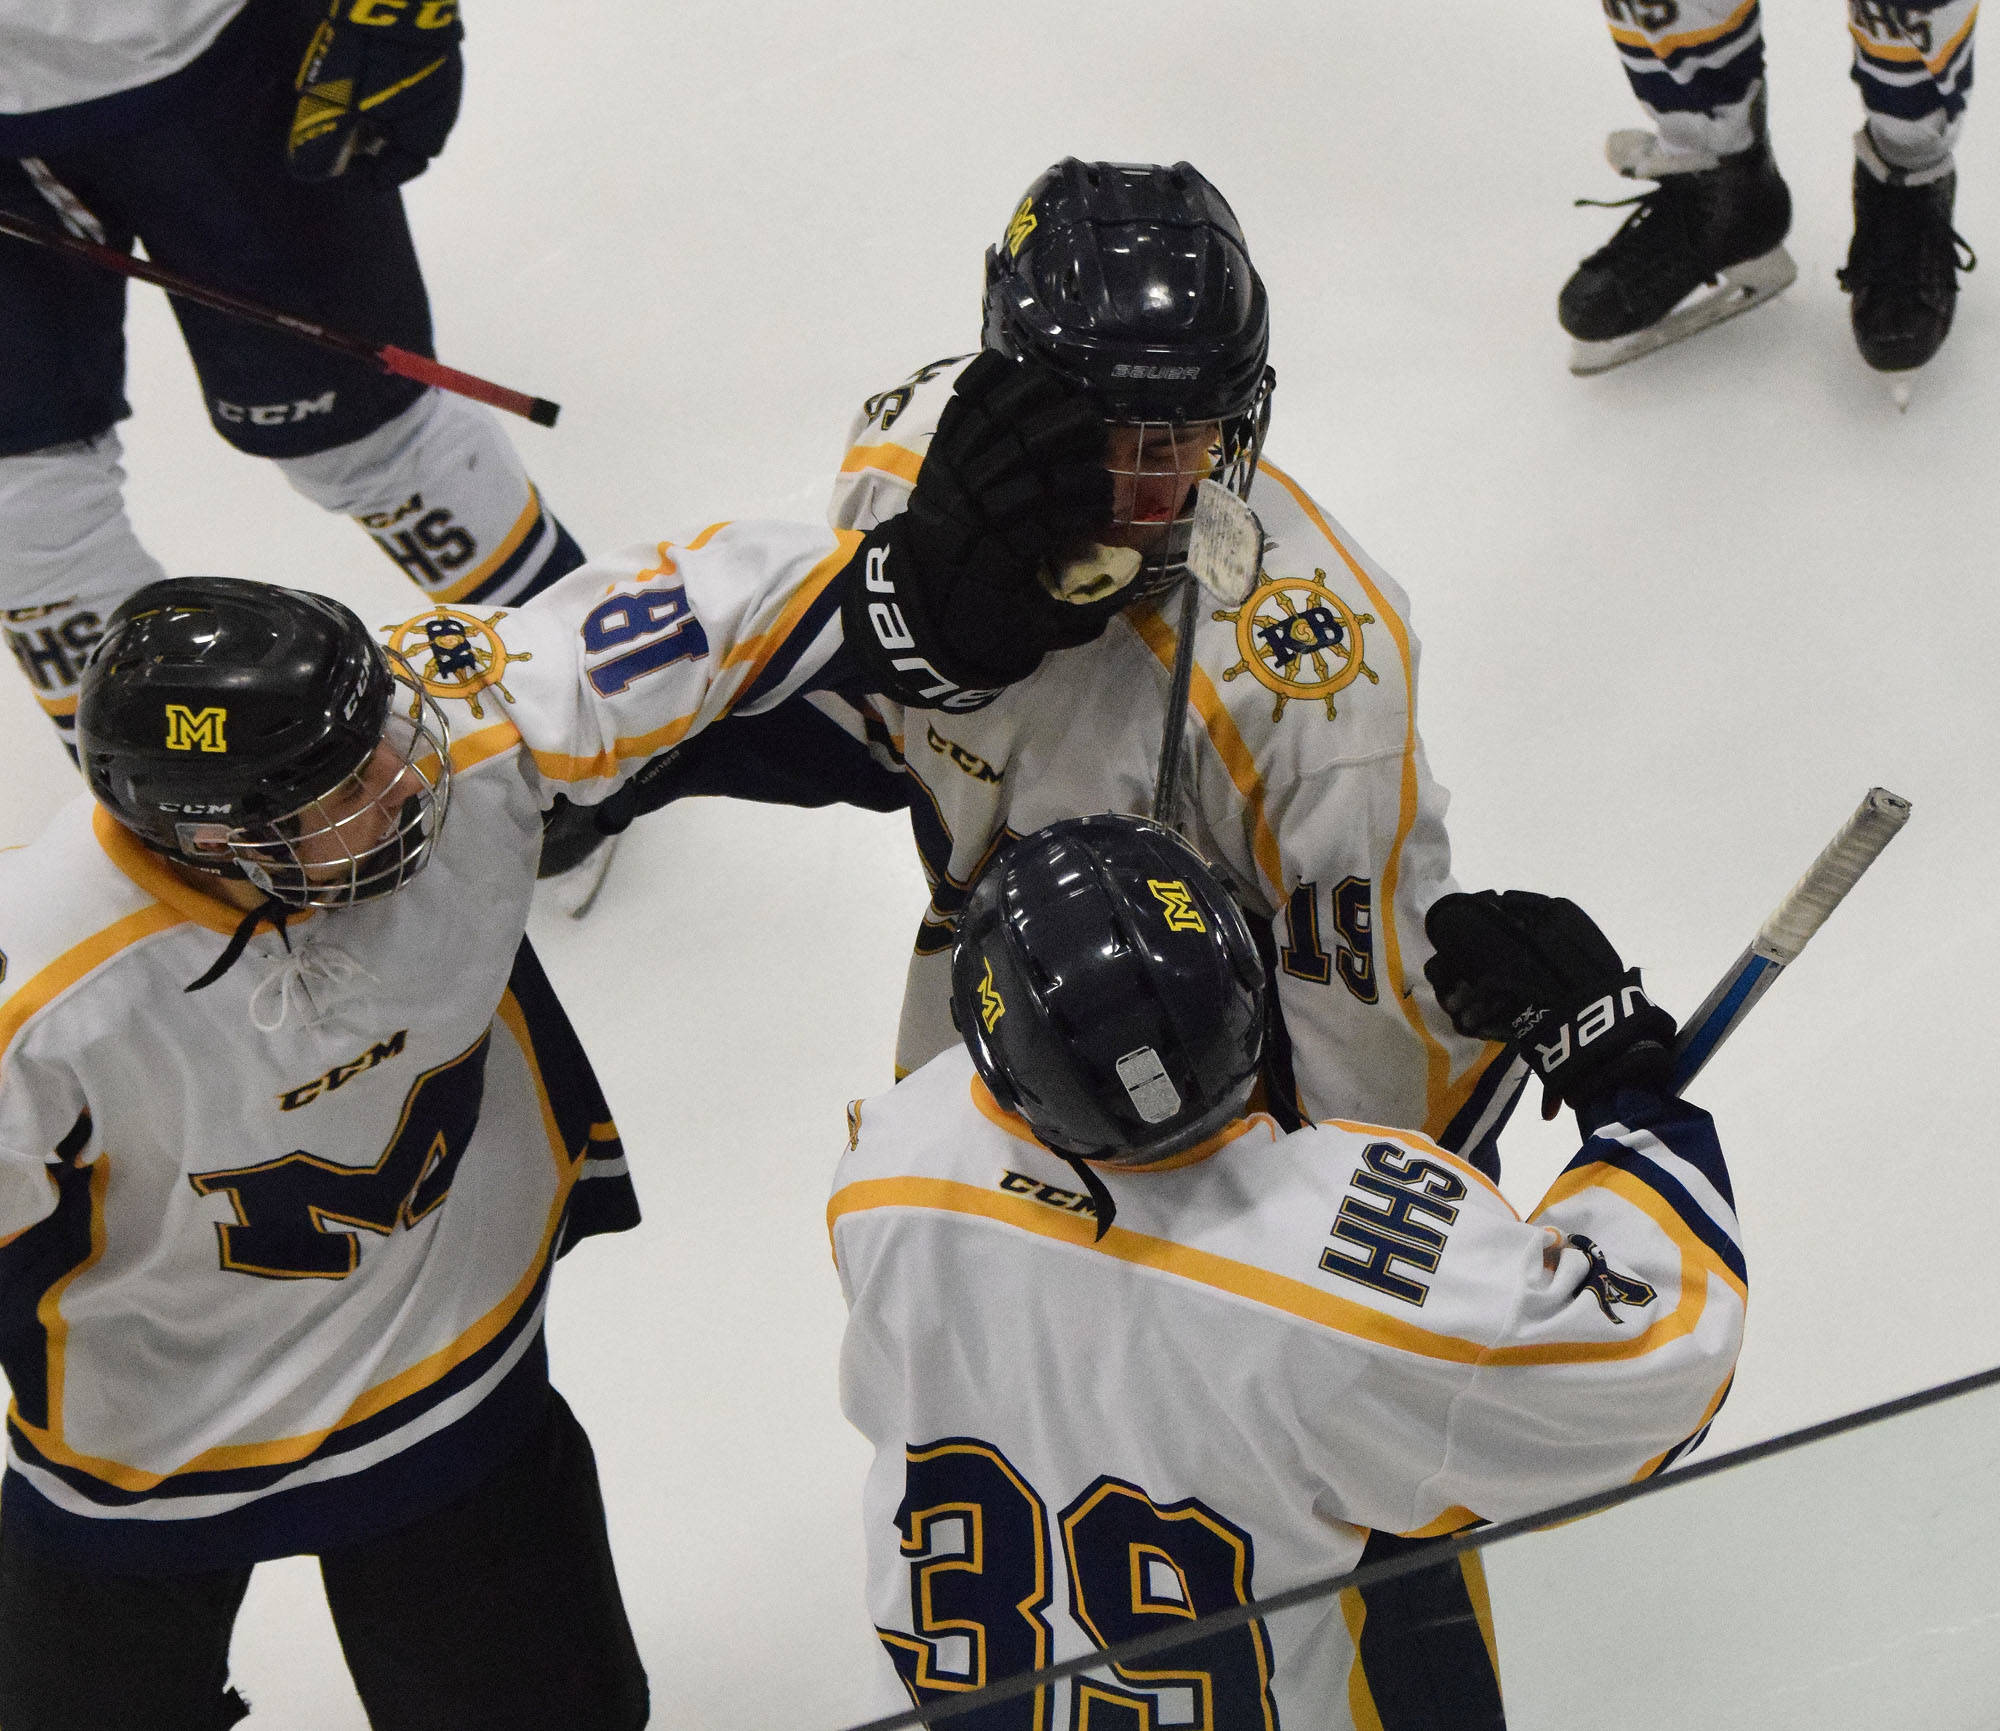 Homer’s Aiden Ross (middle) receives congratulations from teammates Thursday after scoring against Glennallen at the Div. II state hockey championship tournament in Wasilla. (Photo by Joey Klecka/Peninsula Clarion)